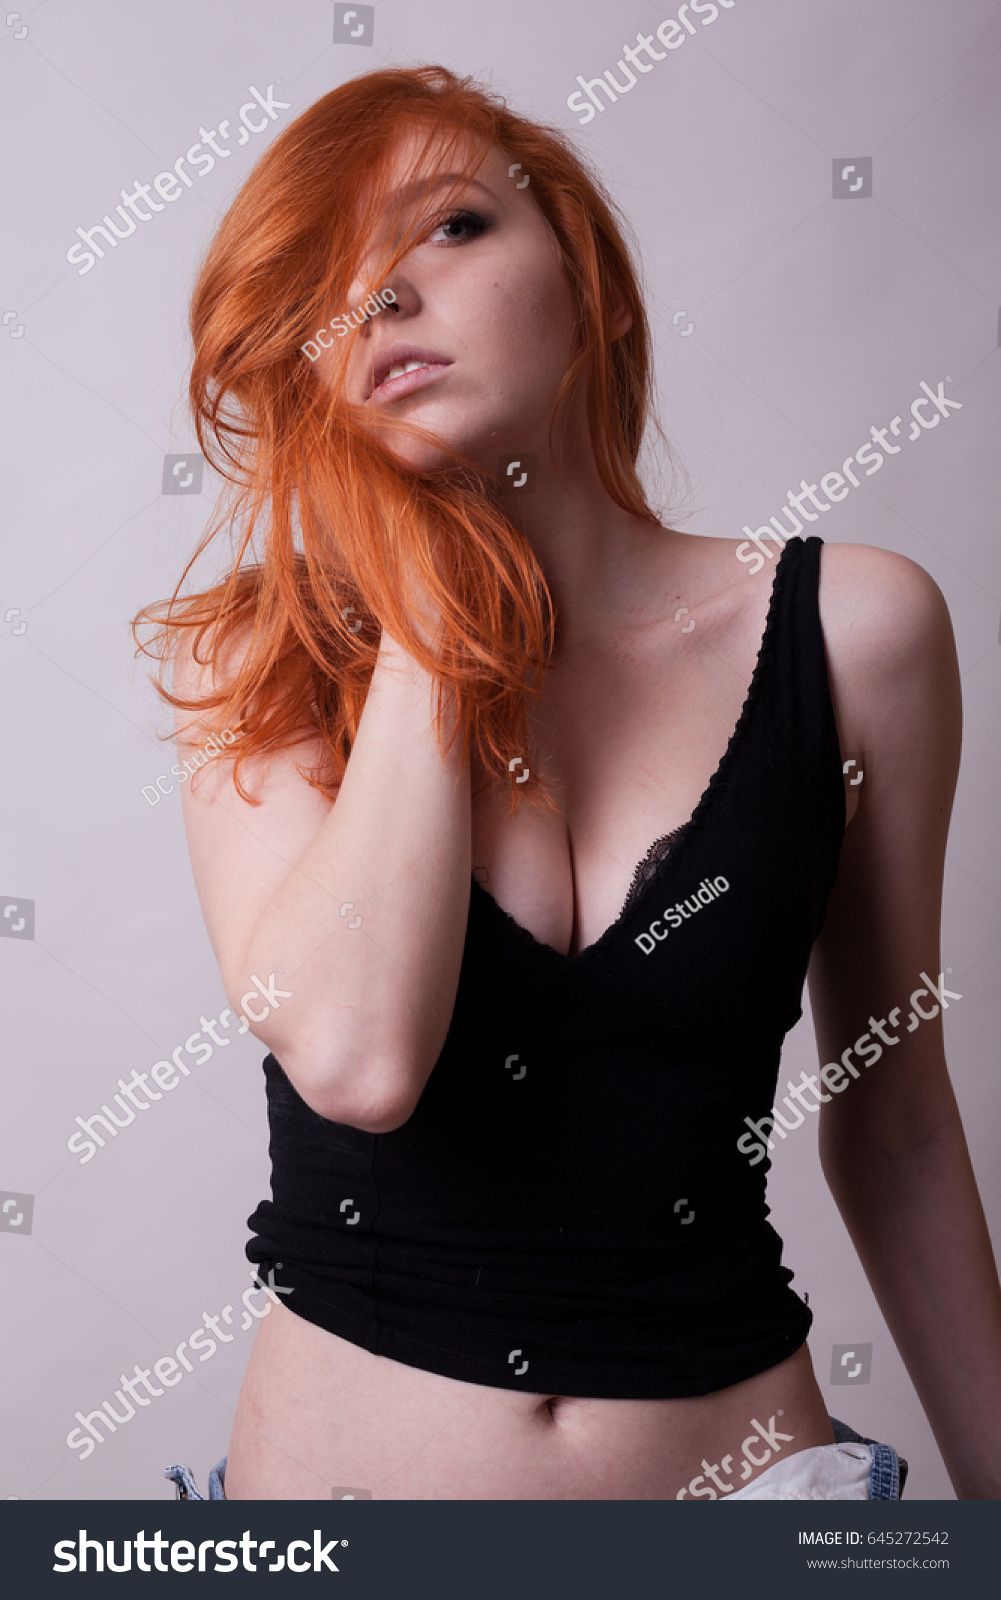 Busty red head